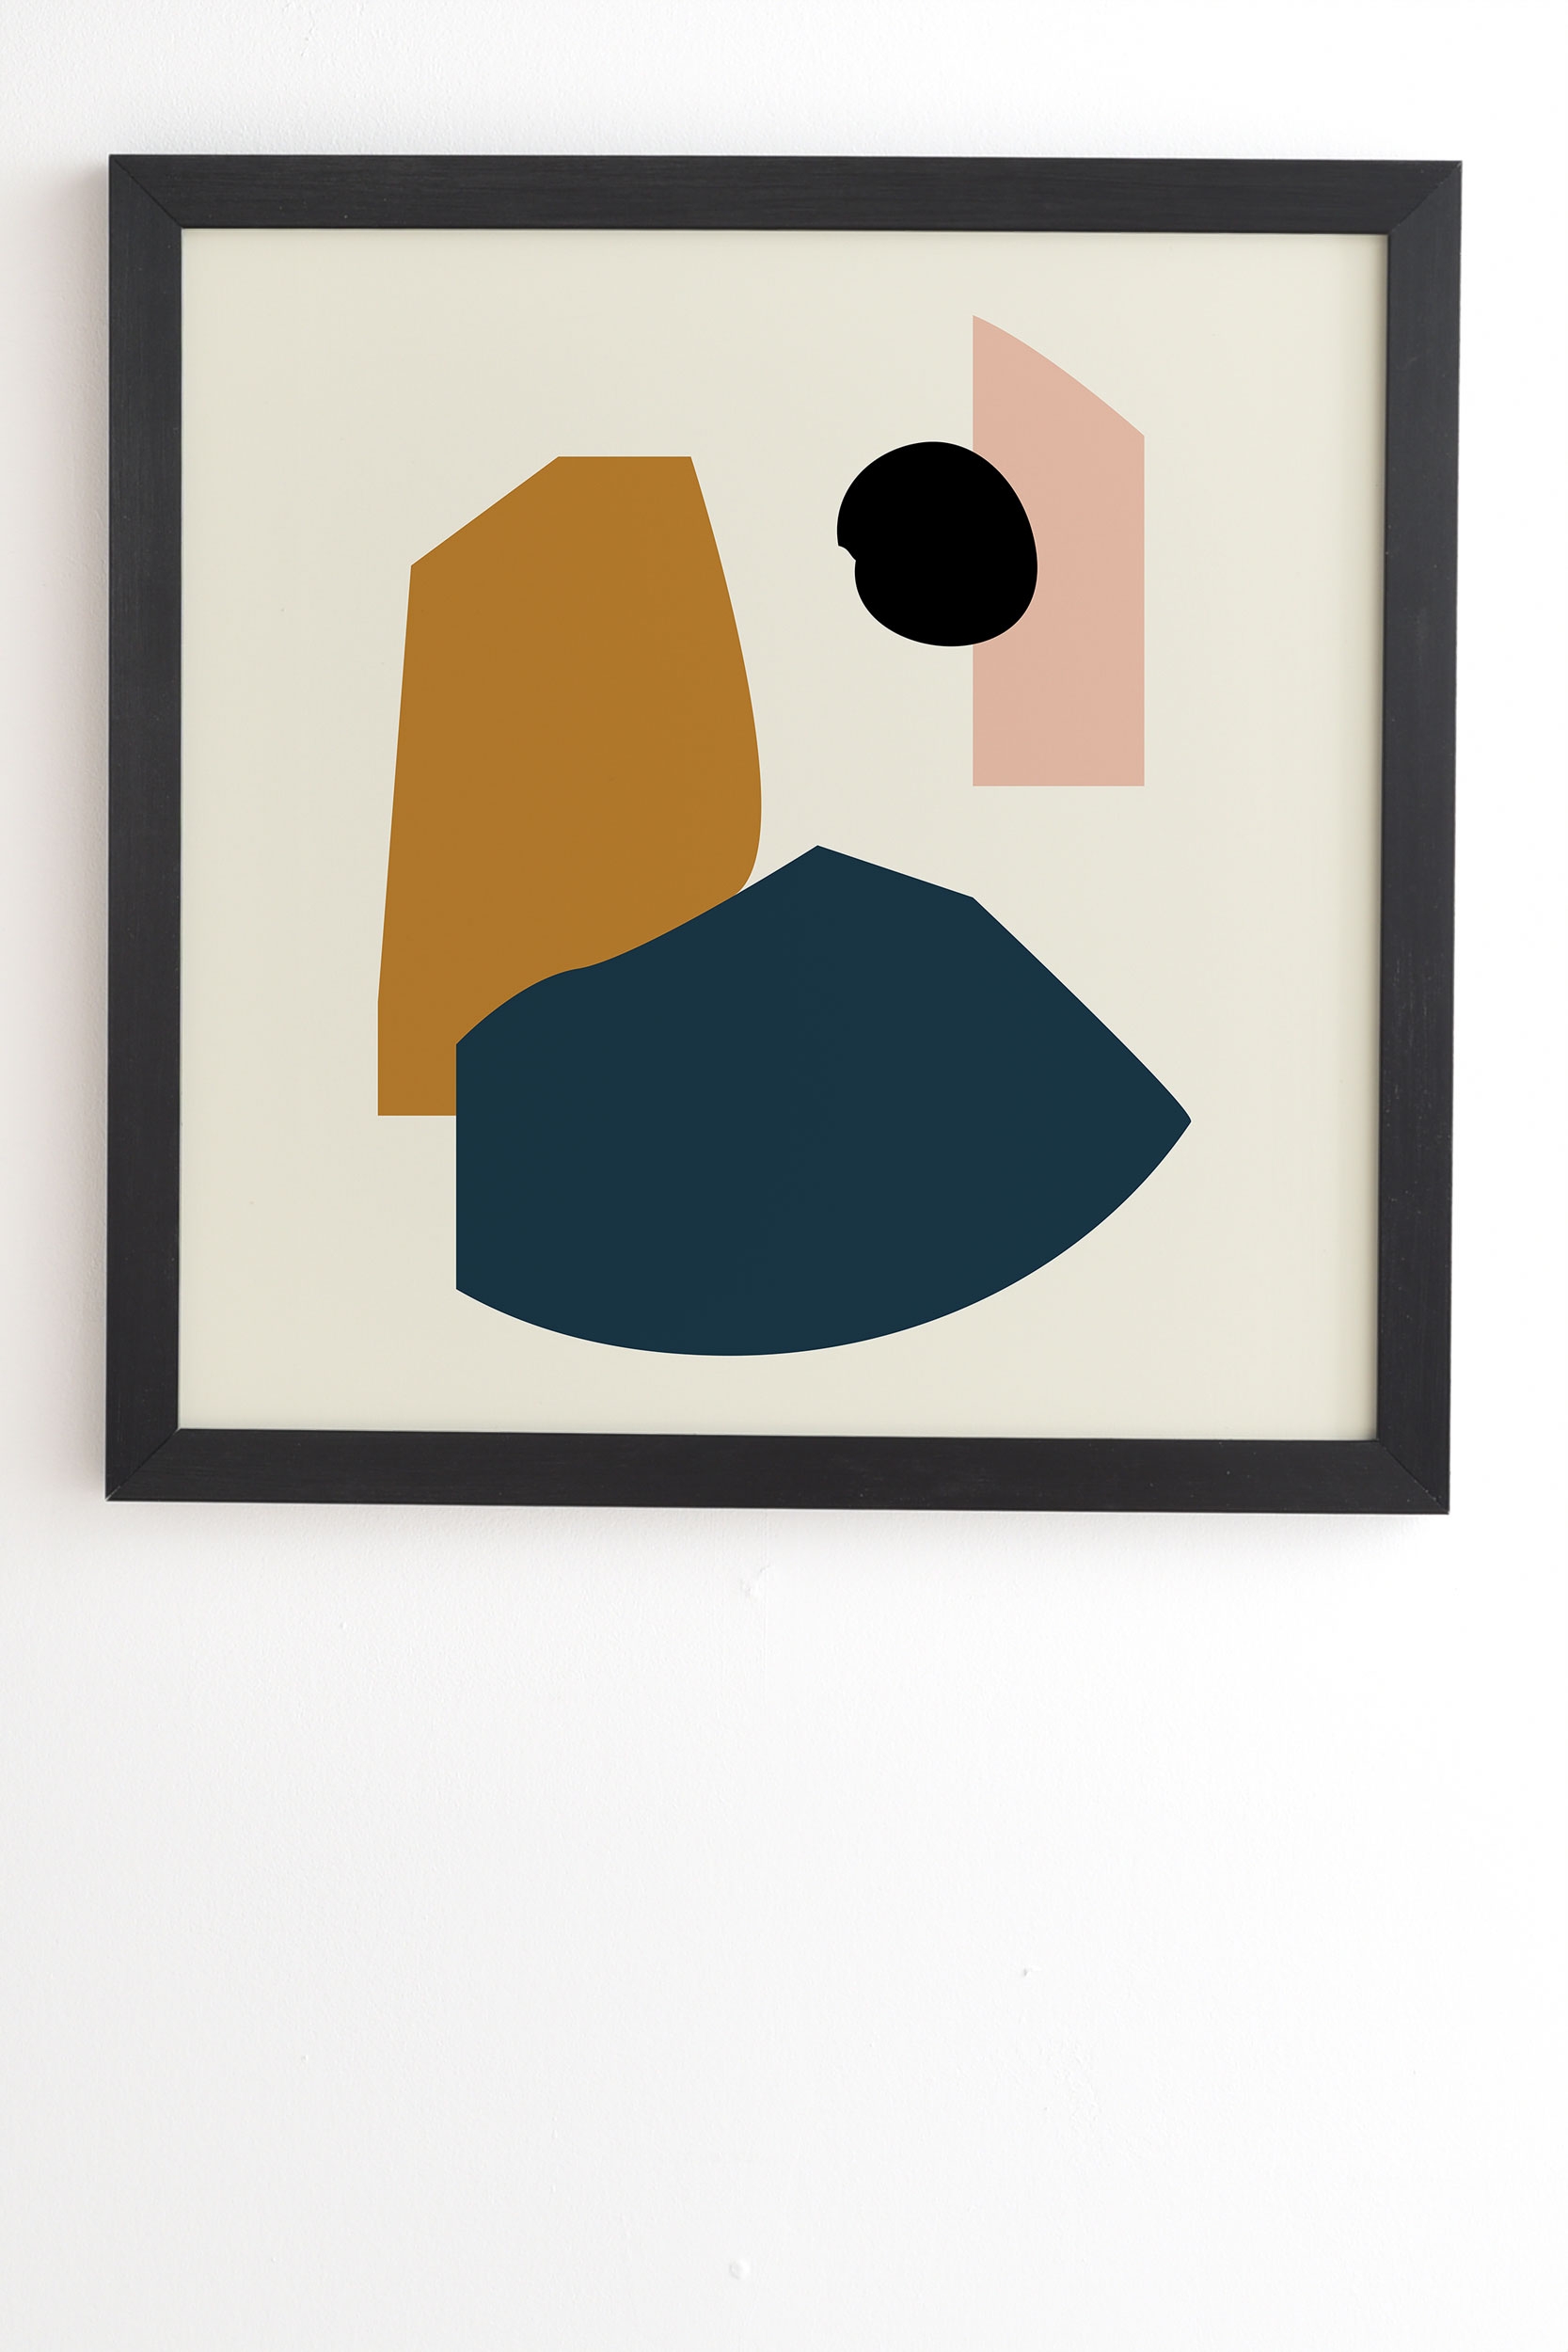 Shape Study 1 Lola Collection by mpgmb - Framed Wall Art Basic Black 19" x 22.4" - Image 1